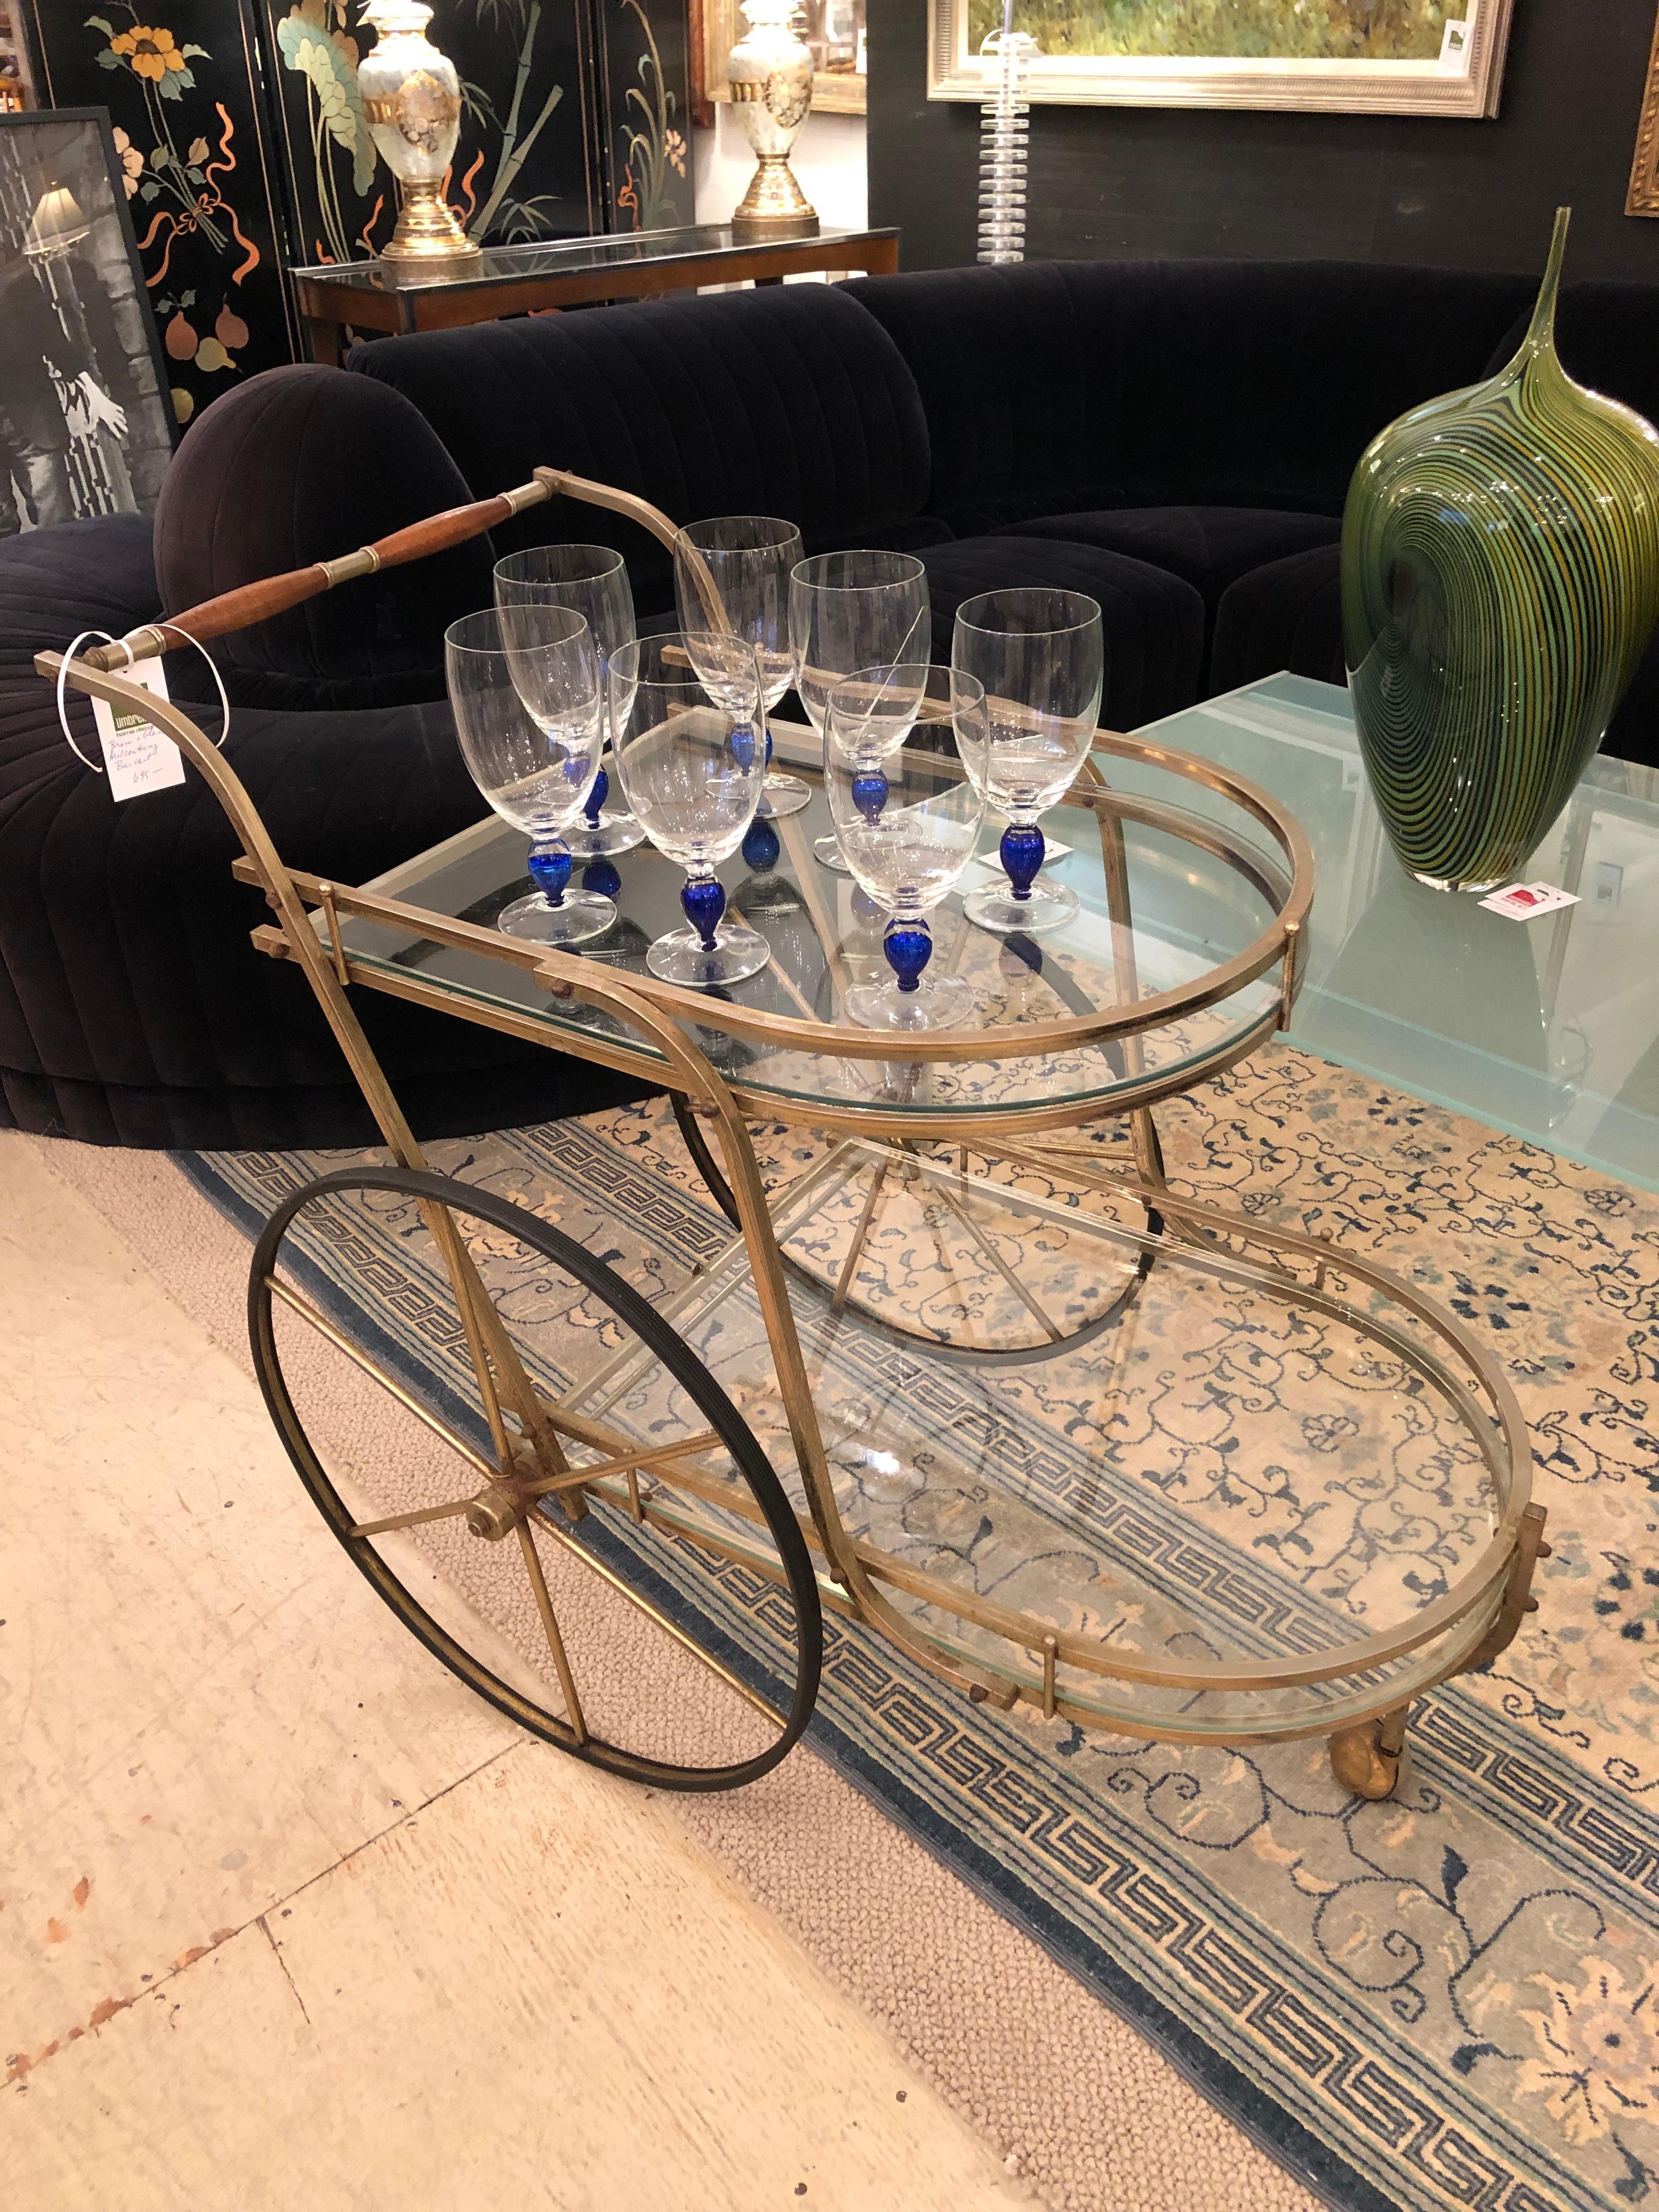 Classy midcentury modern brass and glass bar cart having elegant off set  tiers with curved shape at each end.  The handle is brass and light wood and the large wheels add style to the form.  Rolls easily.  Top tier is 26